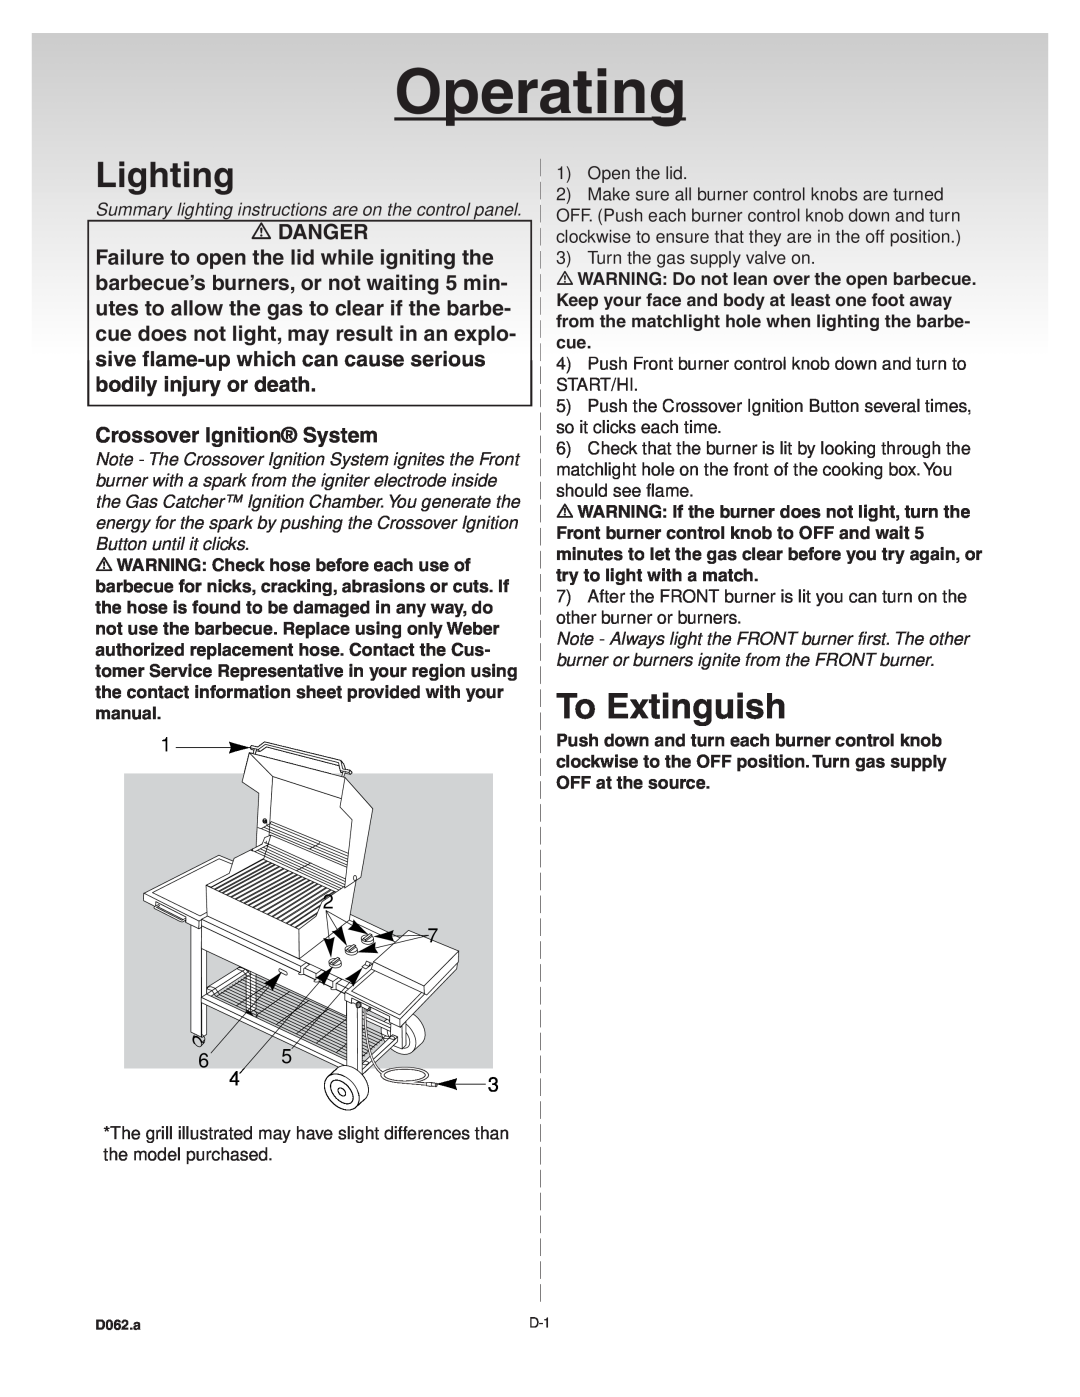 Weber Platinum C Lighting, To Extinguish, Failure to open the lid while igniting the, bodily injury or death, Operating 